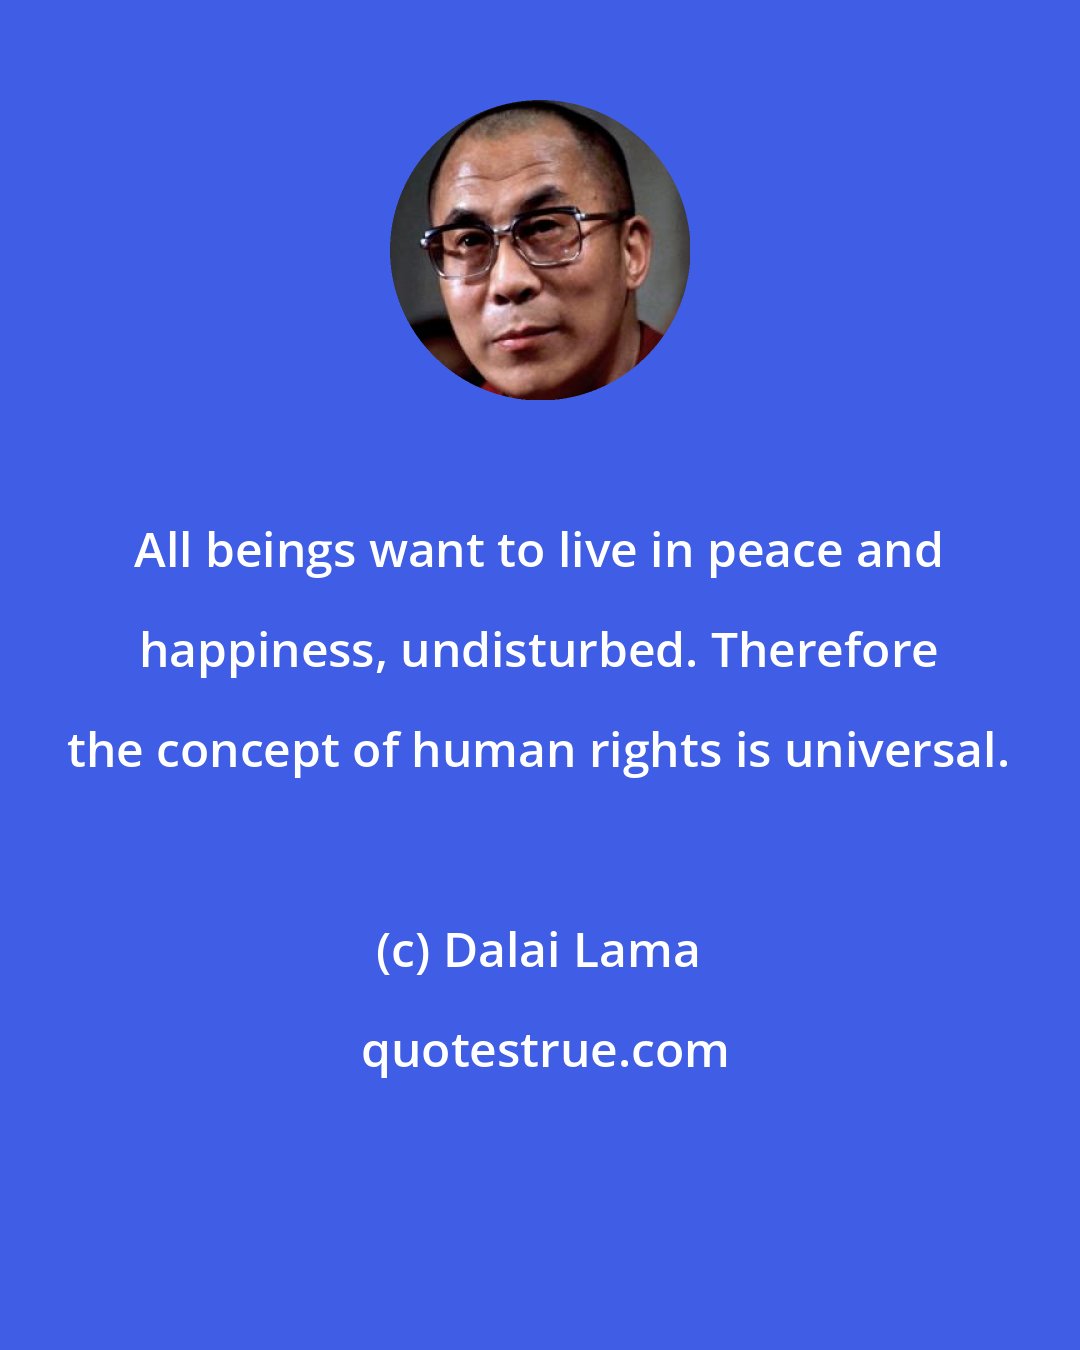 Dalai Lama: All beings want to live in peace and happiness, undisturbed. Therefore the concept of human rights is universal.